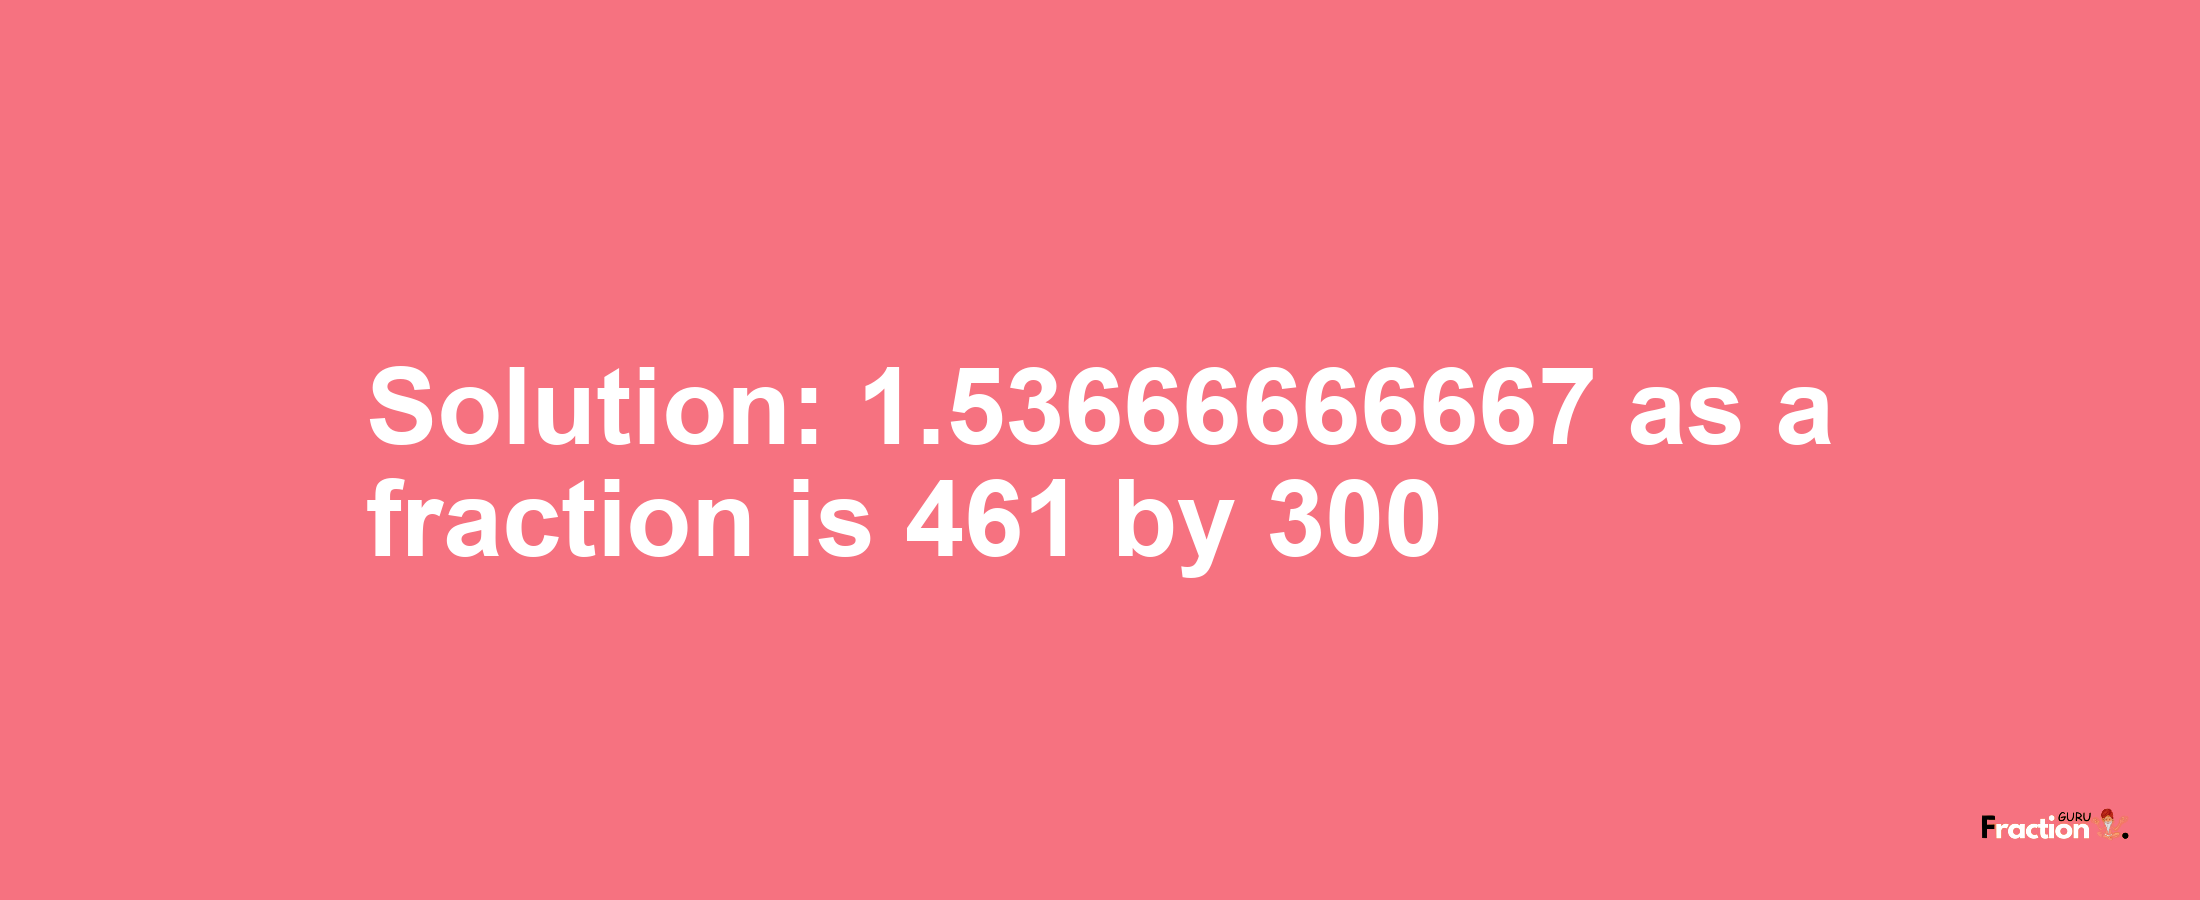 Solution:1.53666666667 as a fraction is 461/300